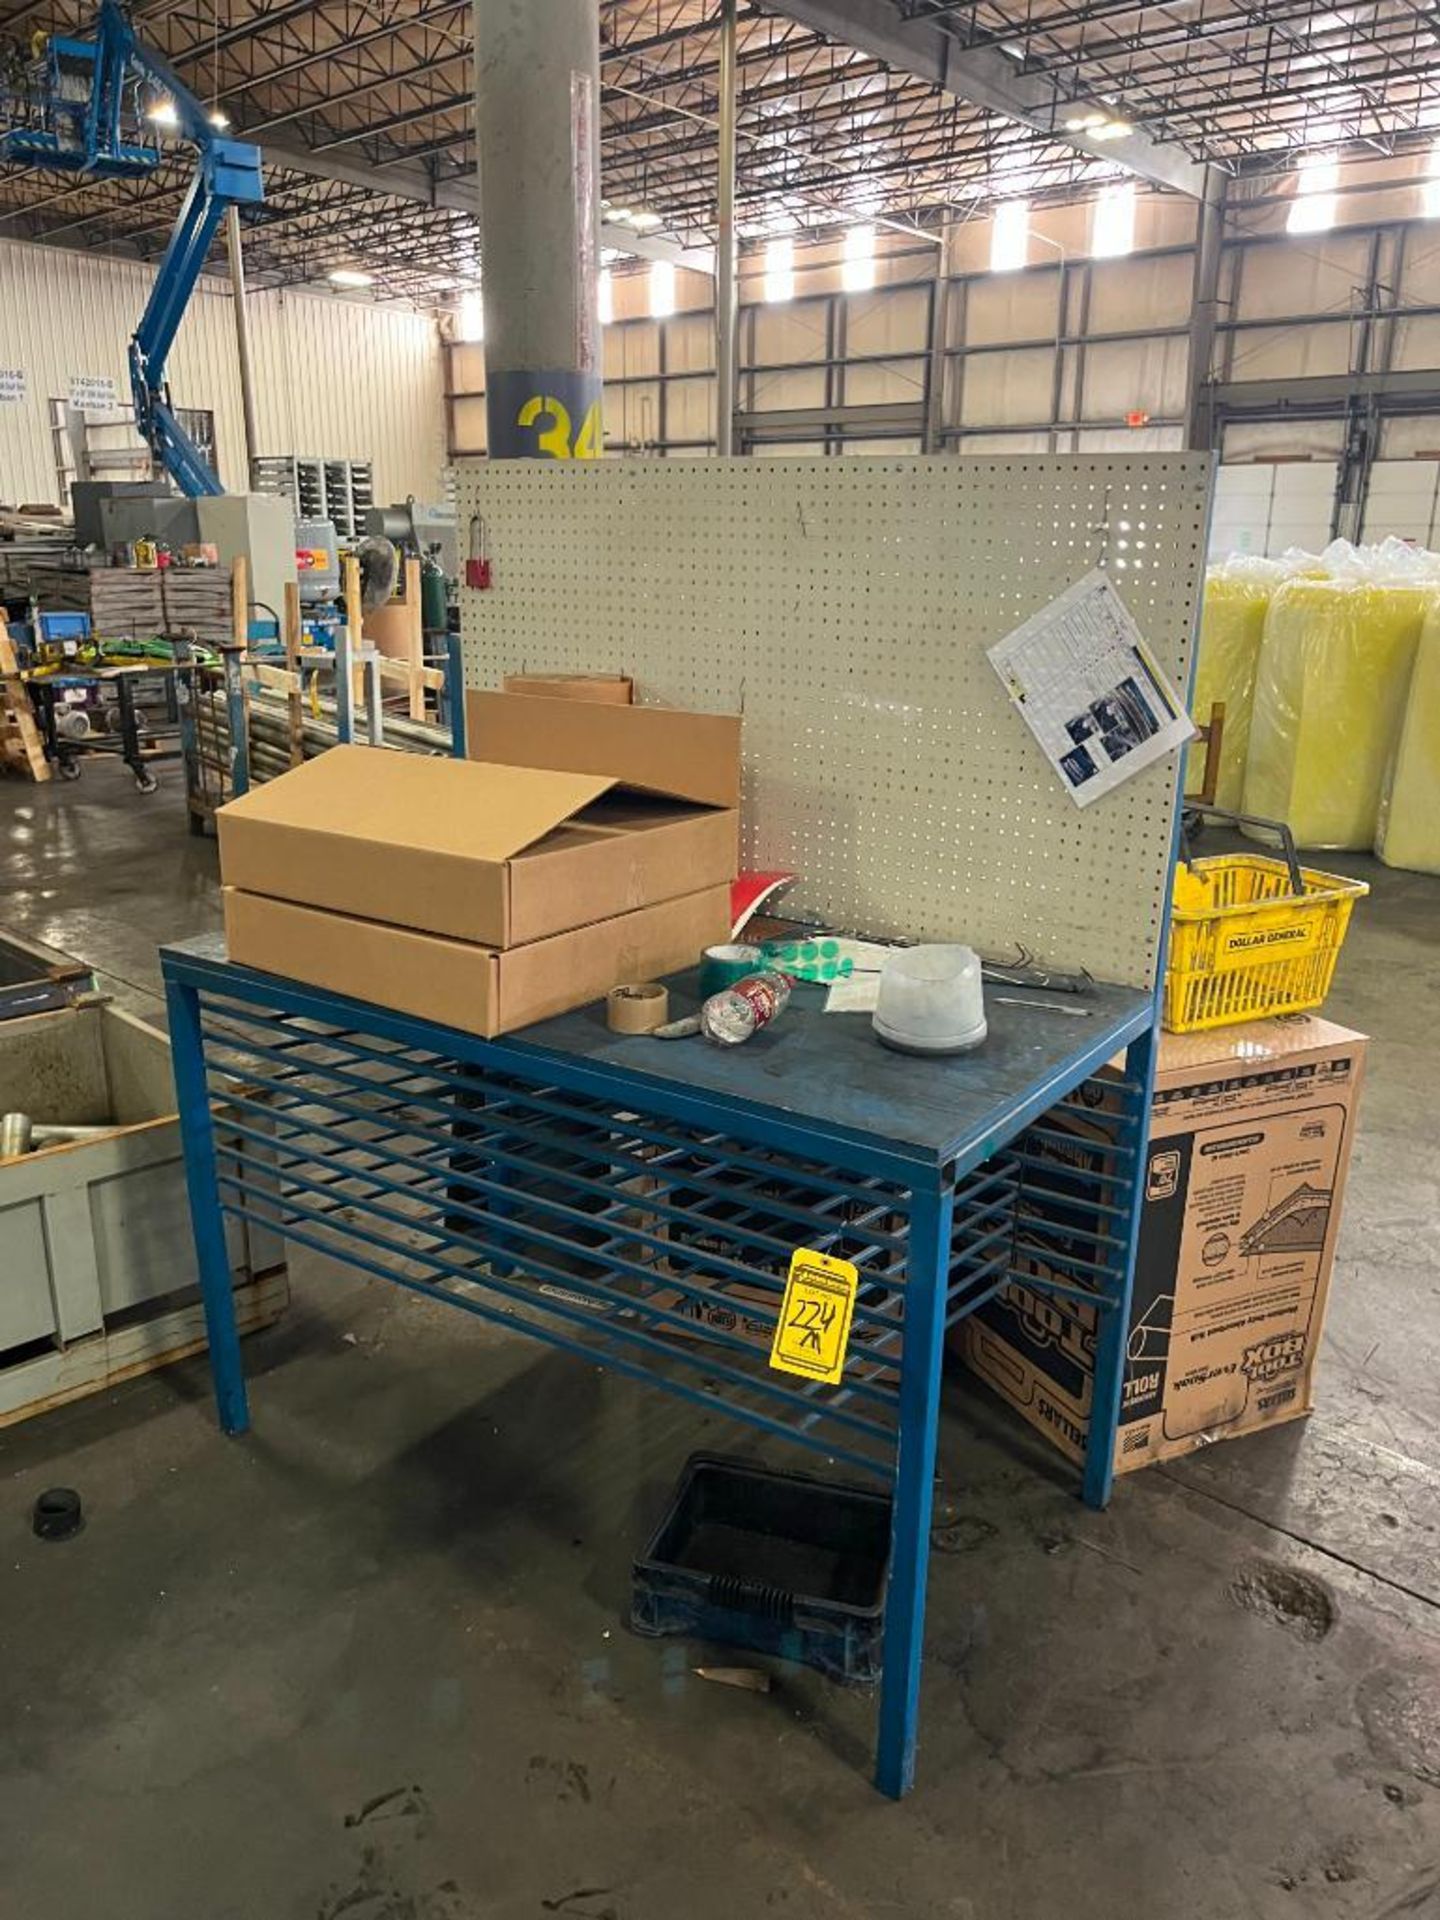 Paint Drying Table, Wood Top (No Content) (End Location: 400 Moog Blvd., Smithville, TN 37166)